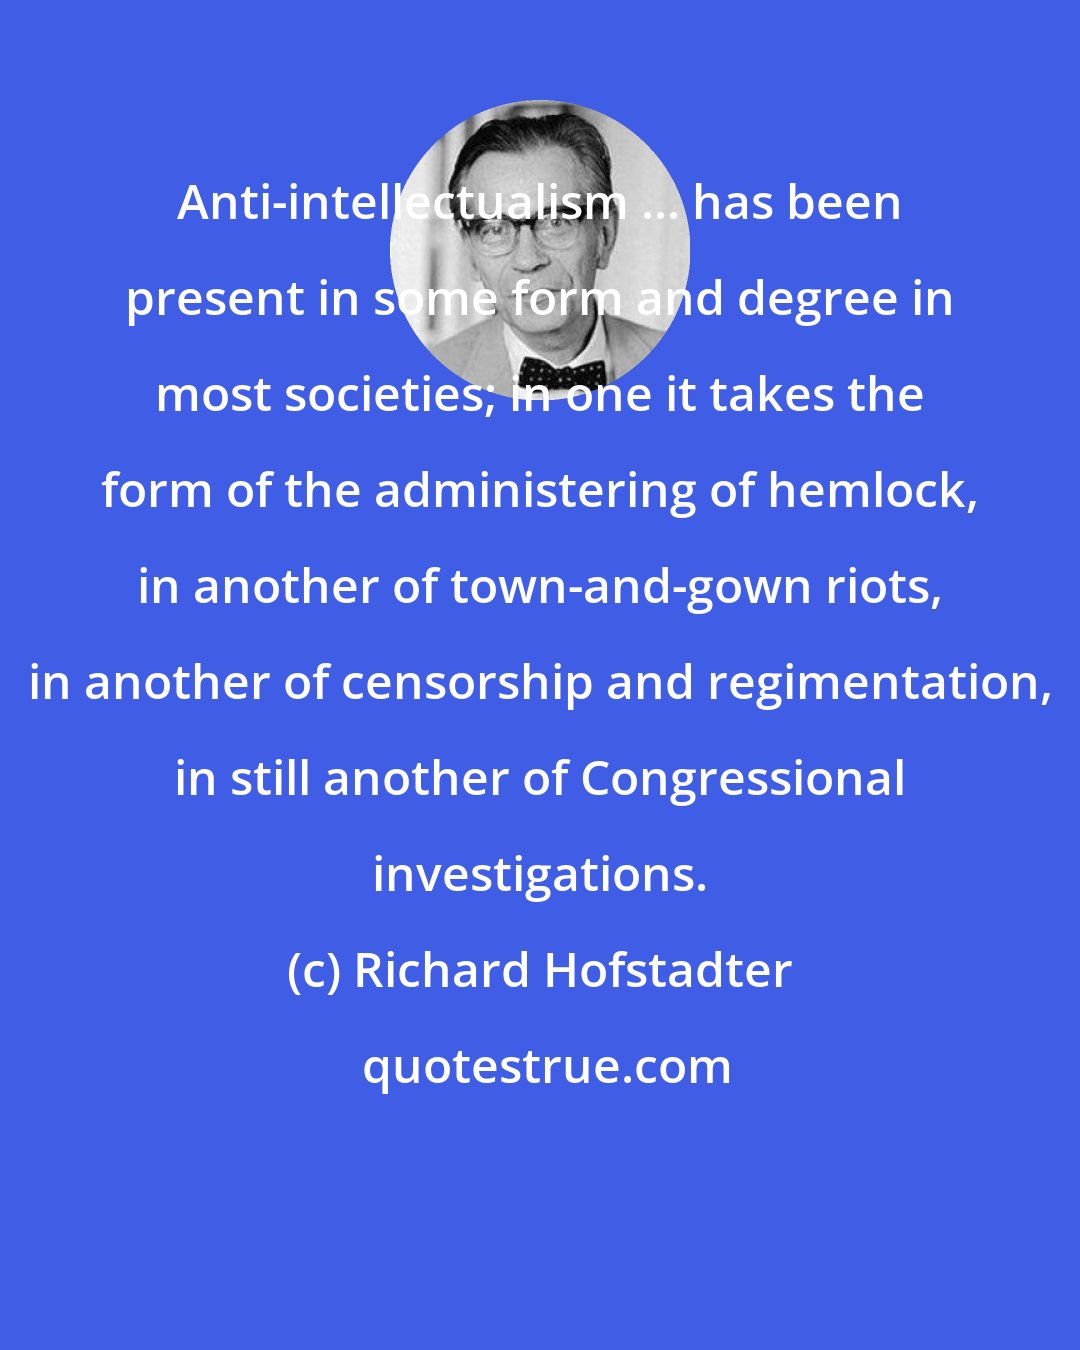 Richard Hofstadter: Anti-intellectualism ... has been present in some form and degree in most societies; in one it takes the form of the administering of hemlock, in another of town-and-gown riots, in another of censorship and regimentation, in still another of Congressional investigations.